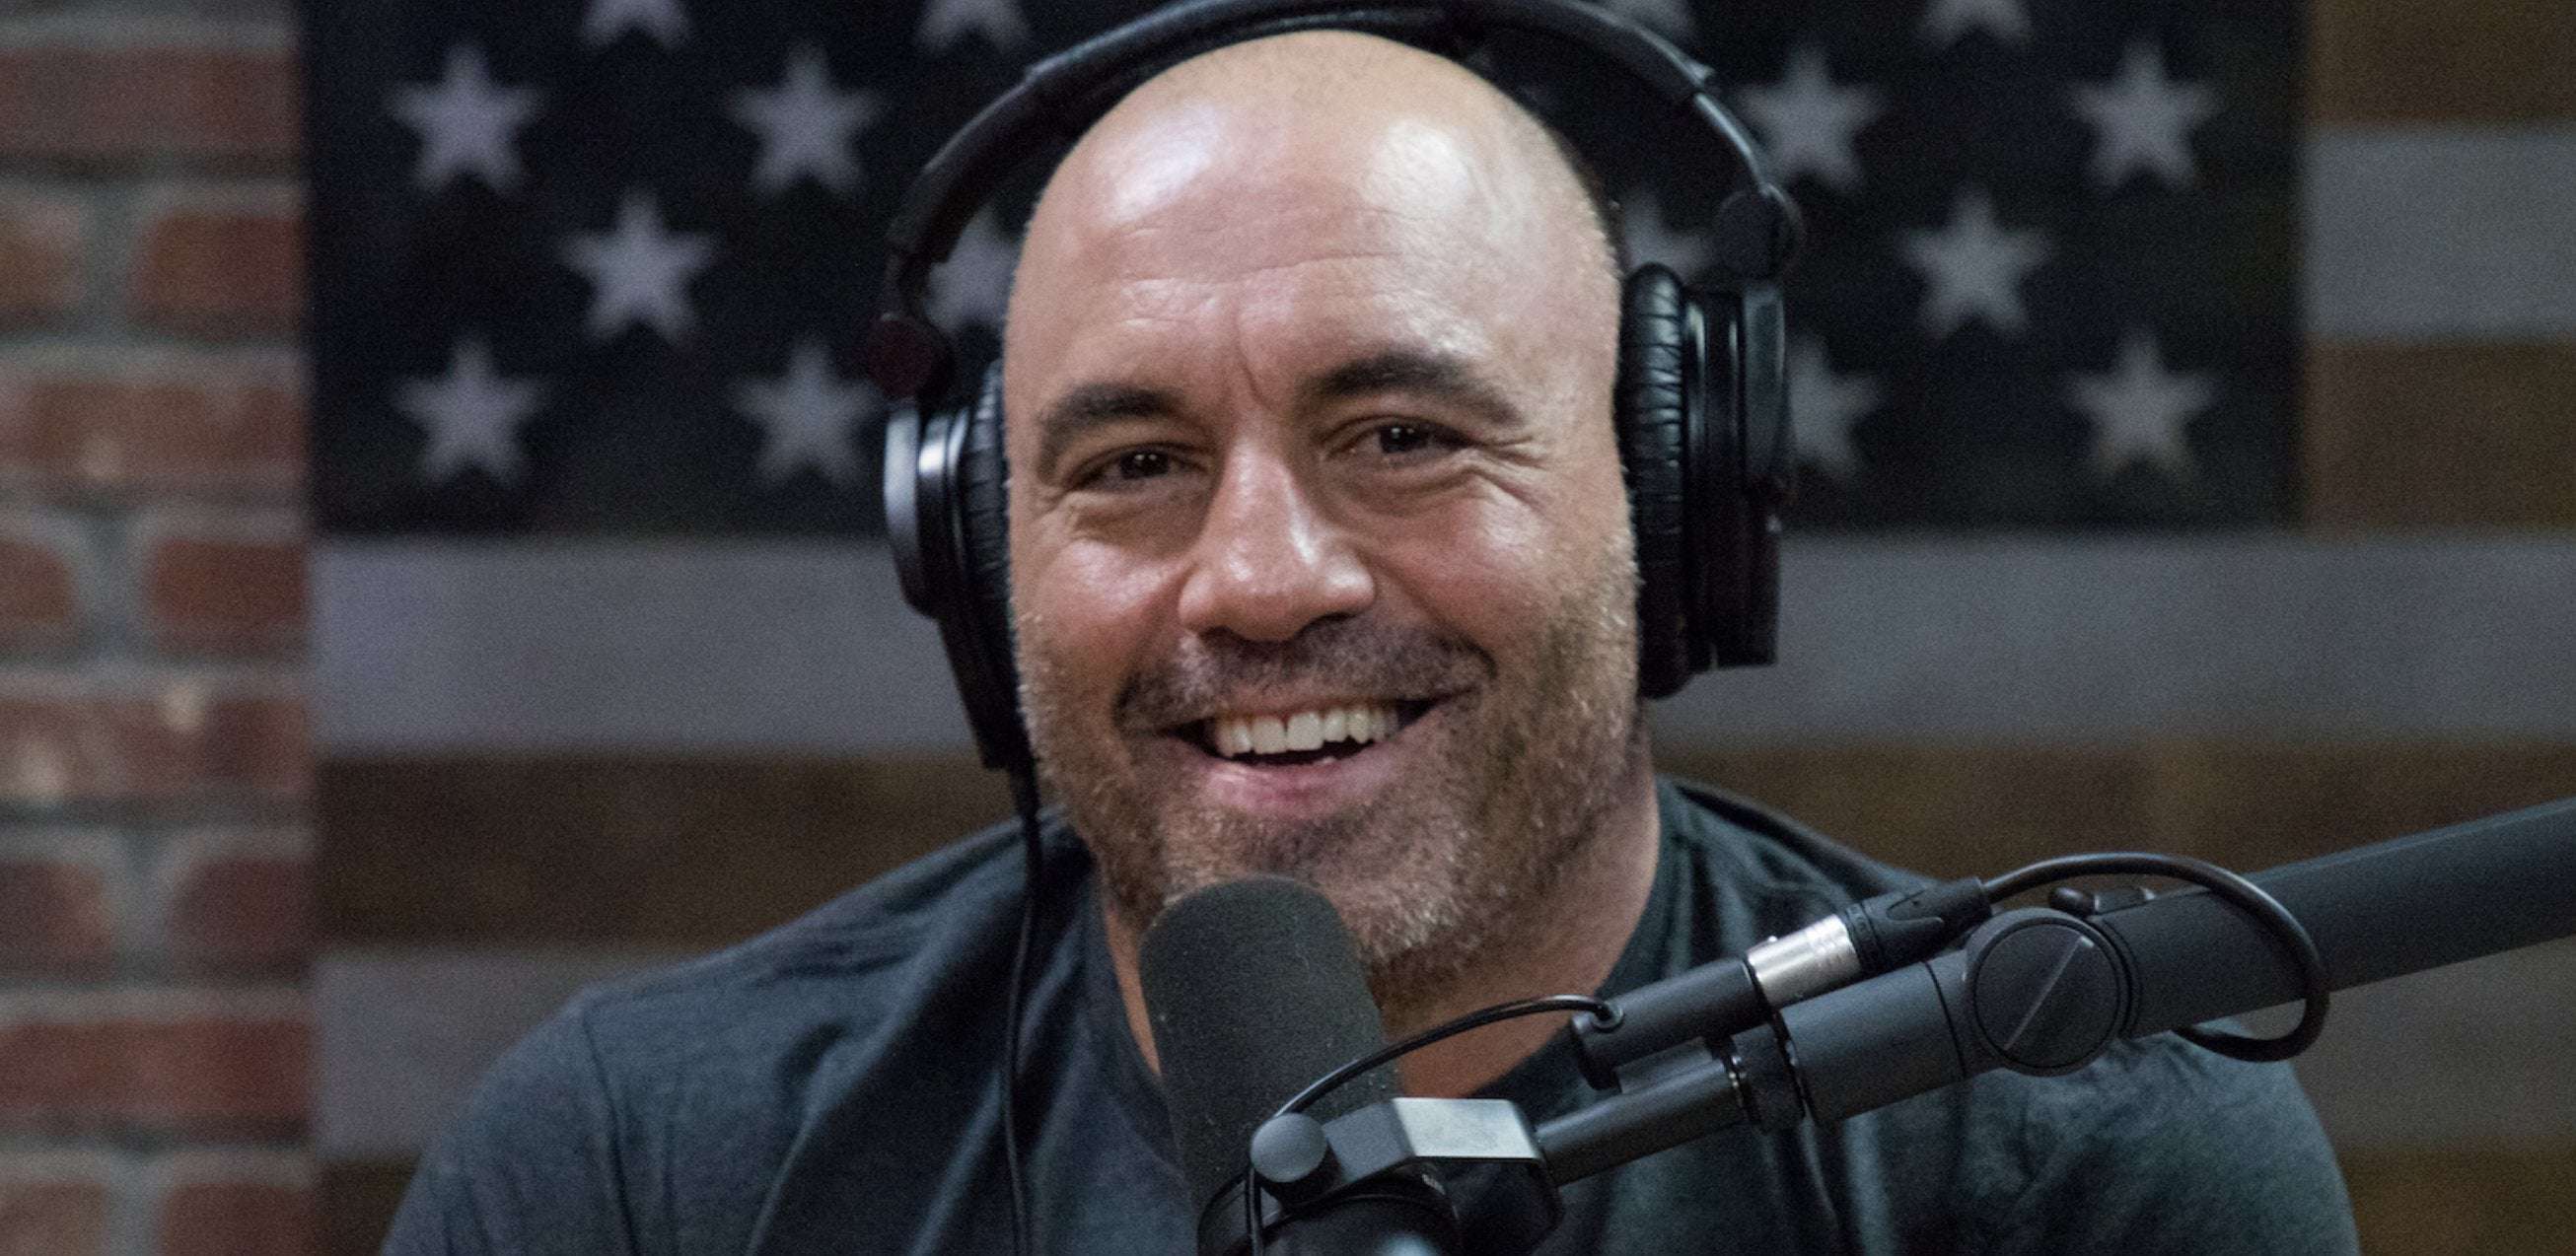 image for Spotify Has Removed 40 Joe Rogan Episodes To Date — Here’s the Full List